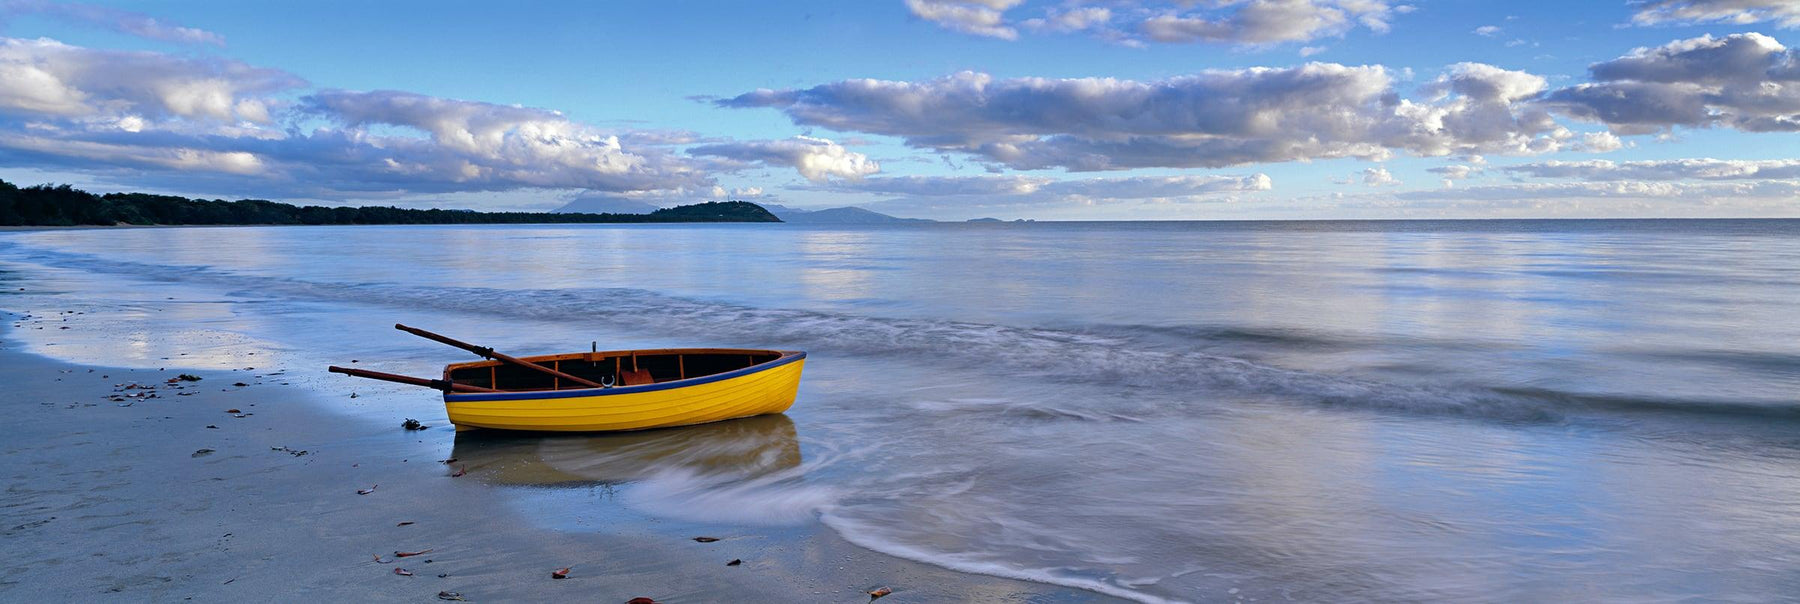 Yellow rowboat washed a shore on the wet sand beach in Port Douglas Australia